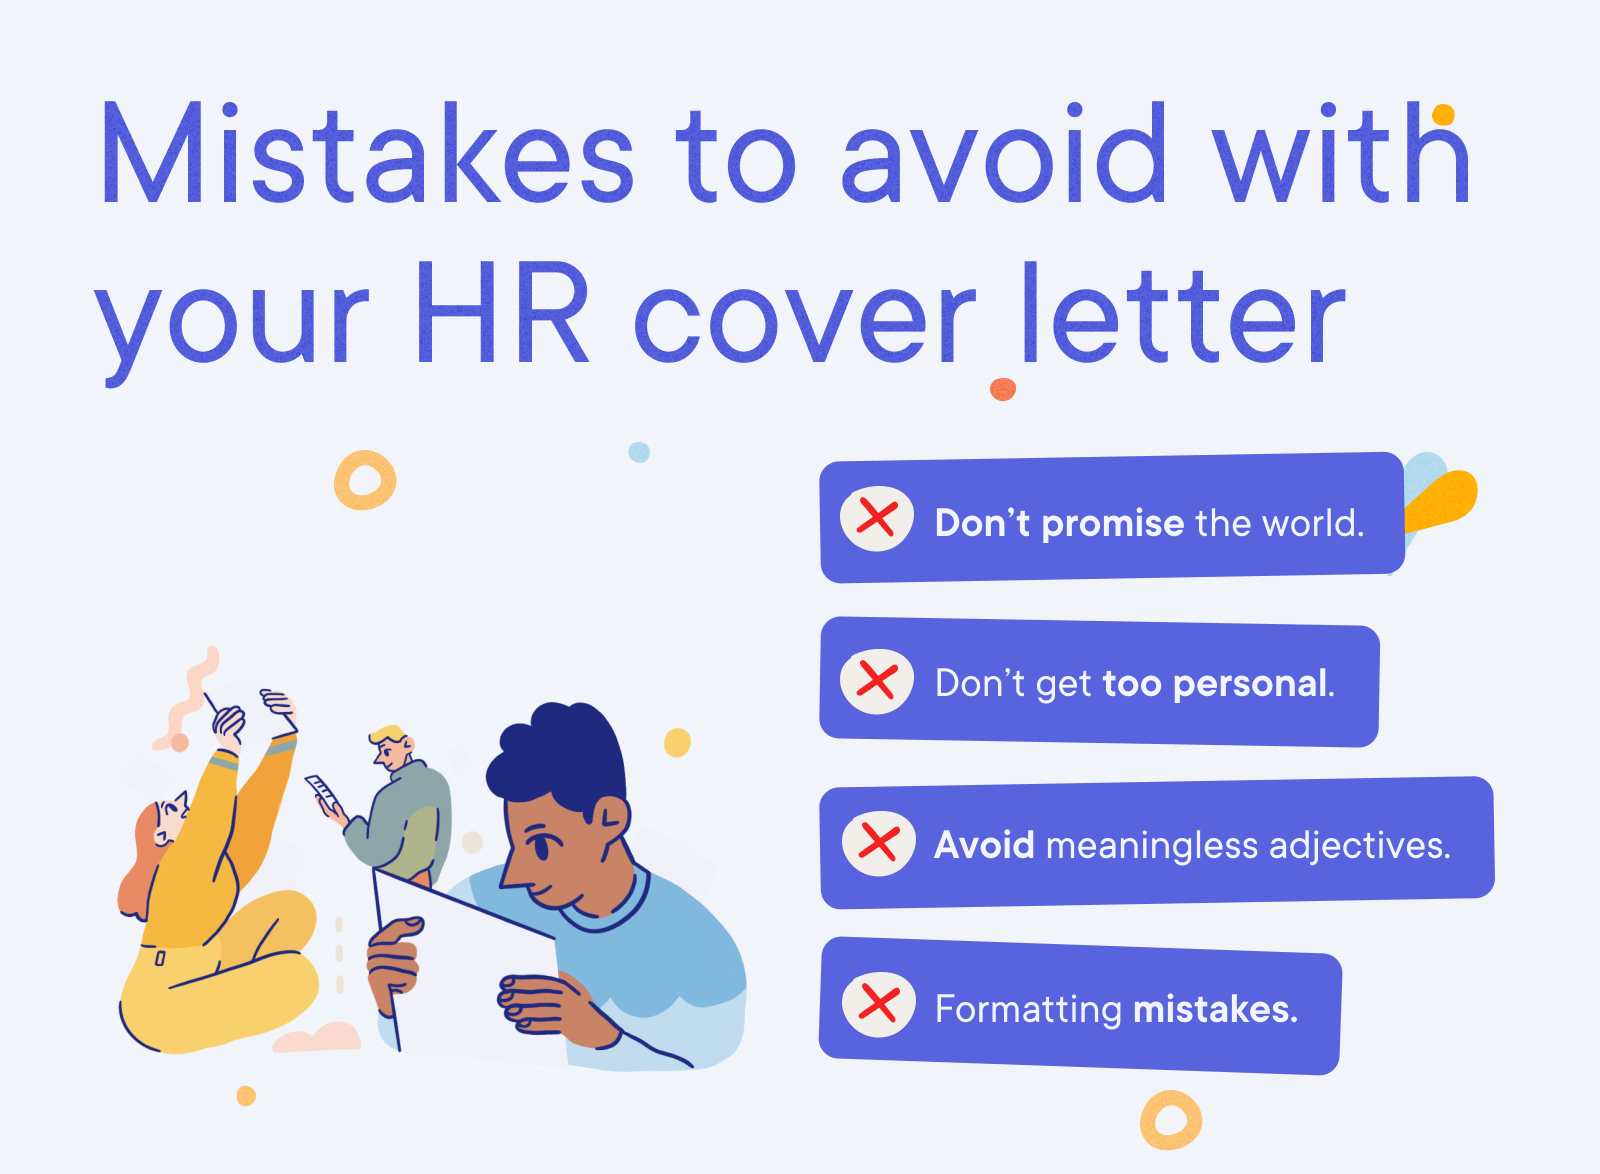 HR - Mistakes to avoid with your HR cover letter